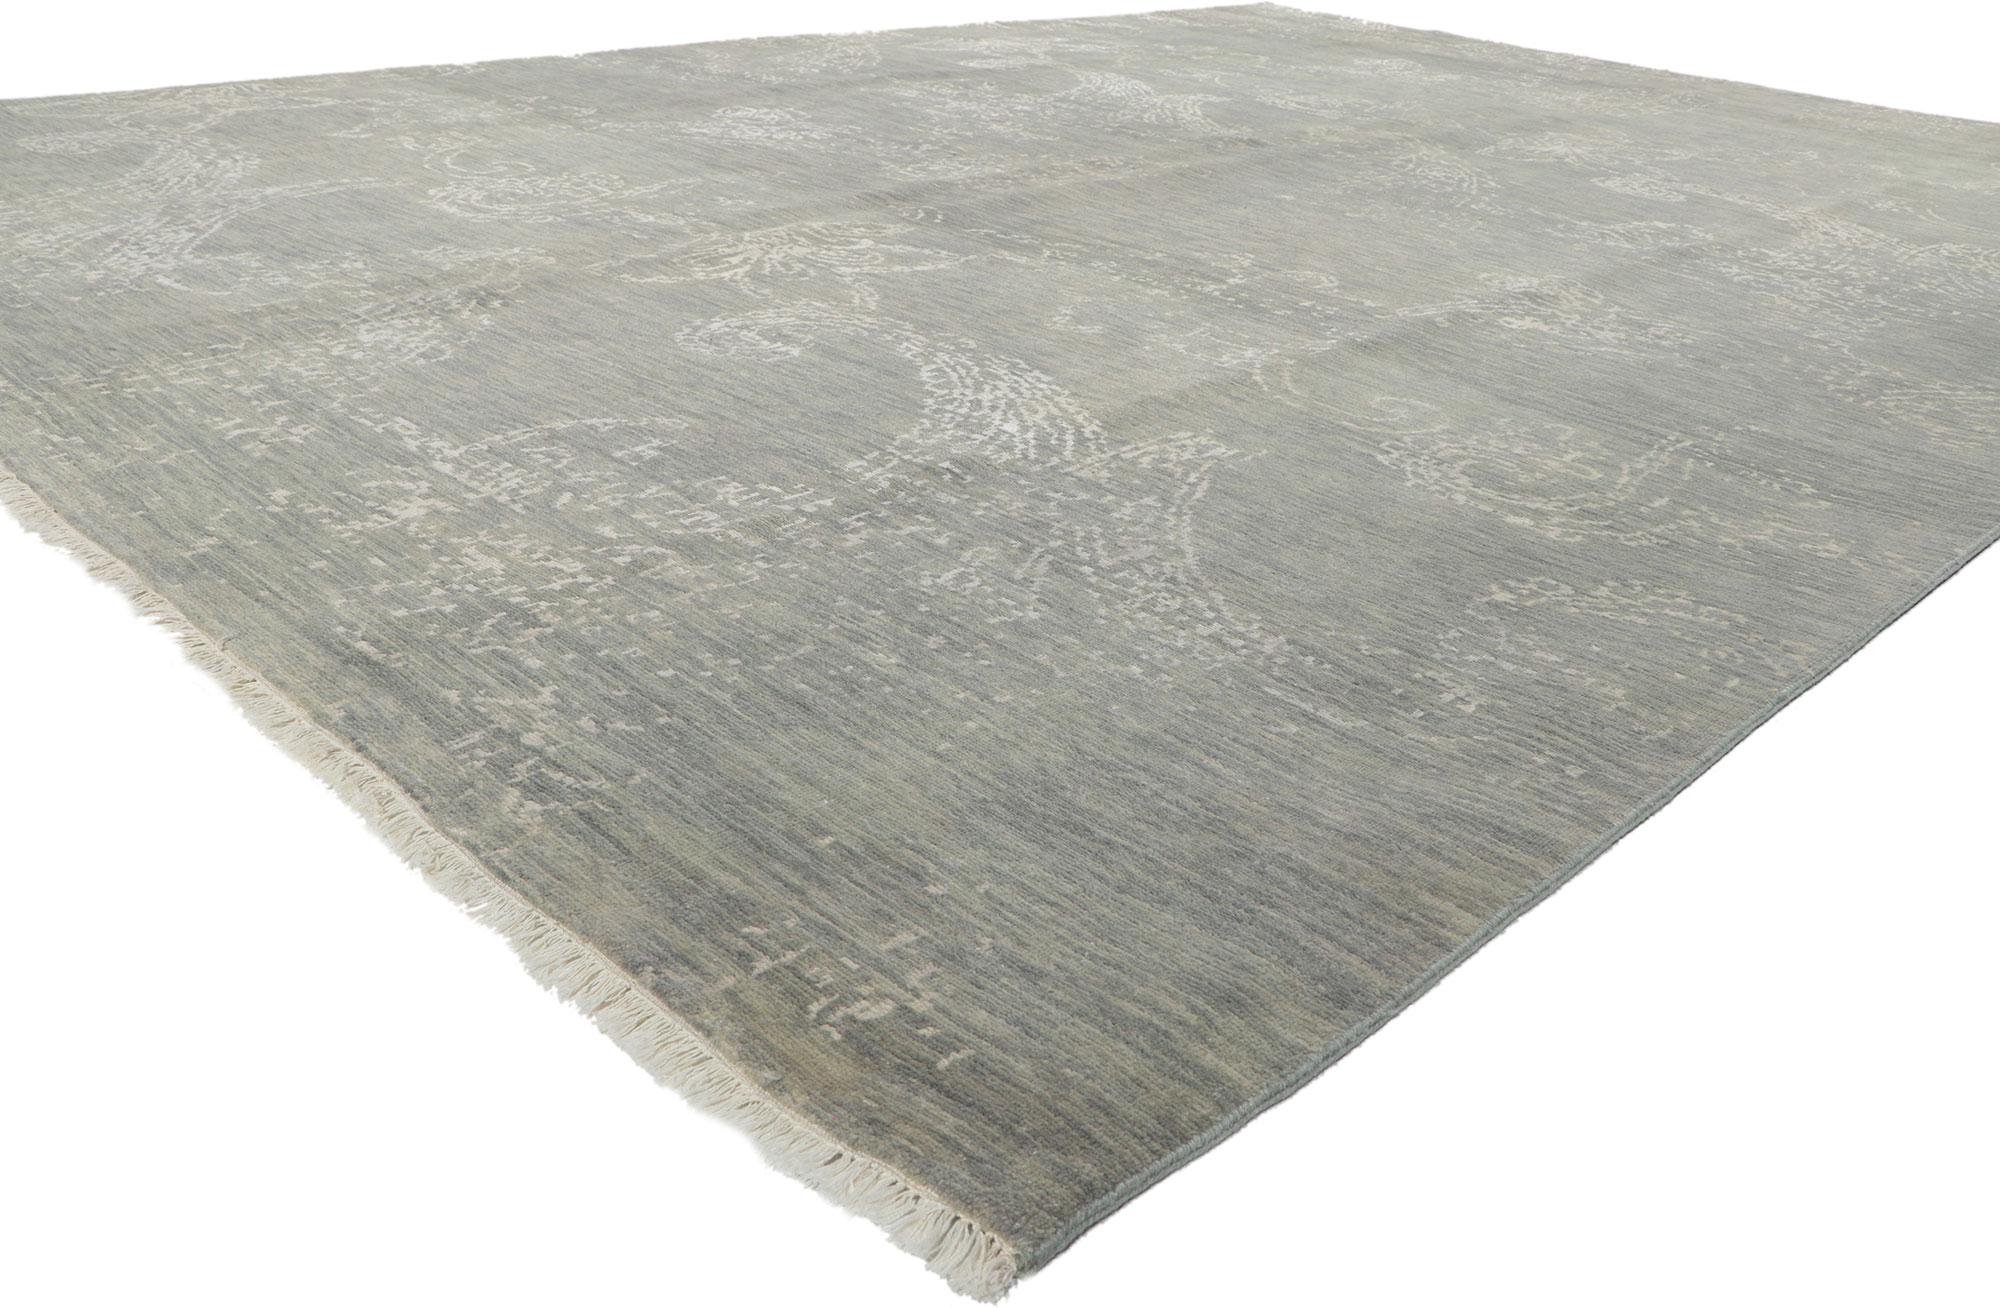 30157 New Gray transitional area rug, measures 10'01 x 14'02.
Emanating traditional sensibility with incredible detail and texture, this hand knotted wool transitional gray Indian area rug is a captivating vision of woven beauty. The eye-catching